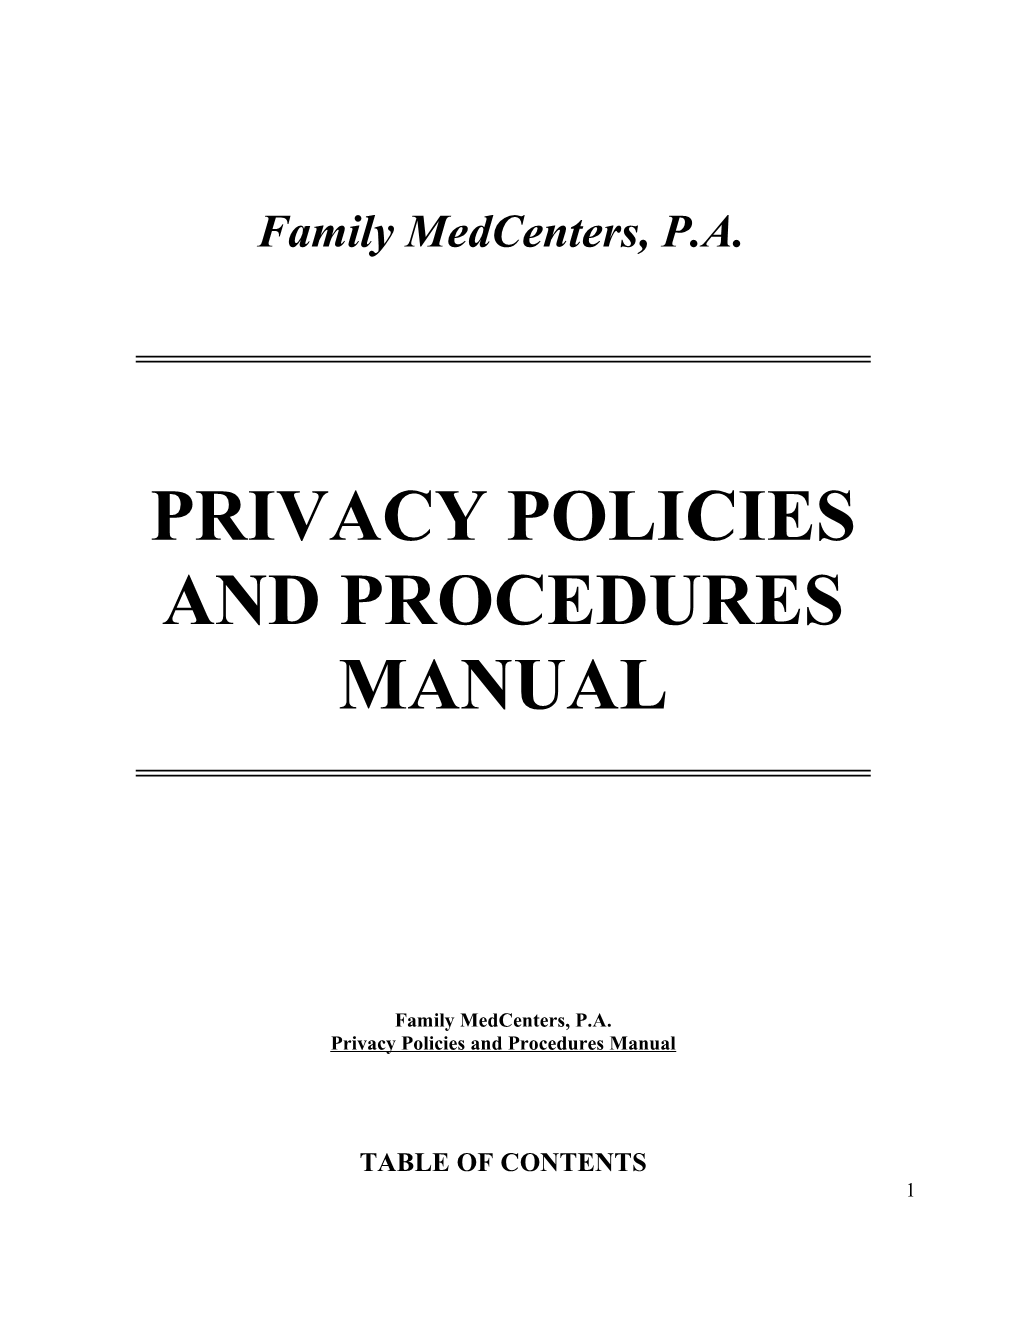 Privacy Policies and Procedures